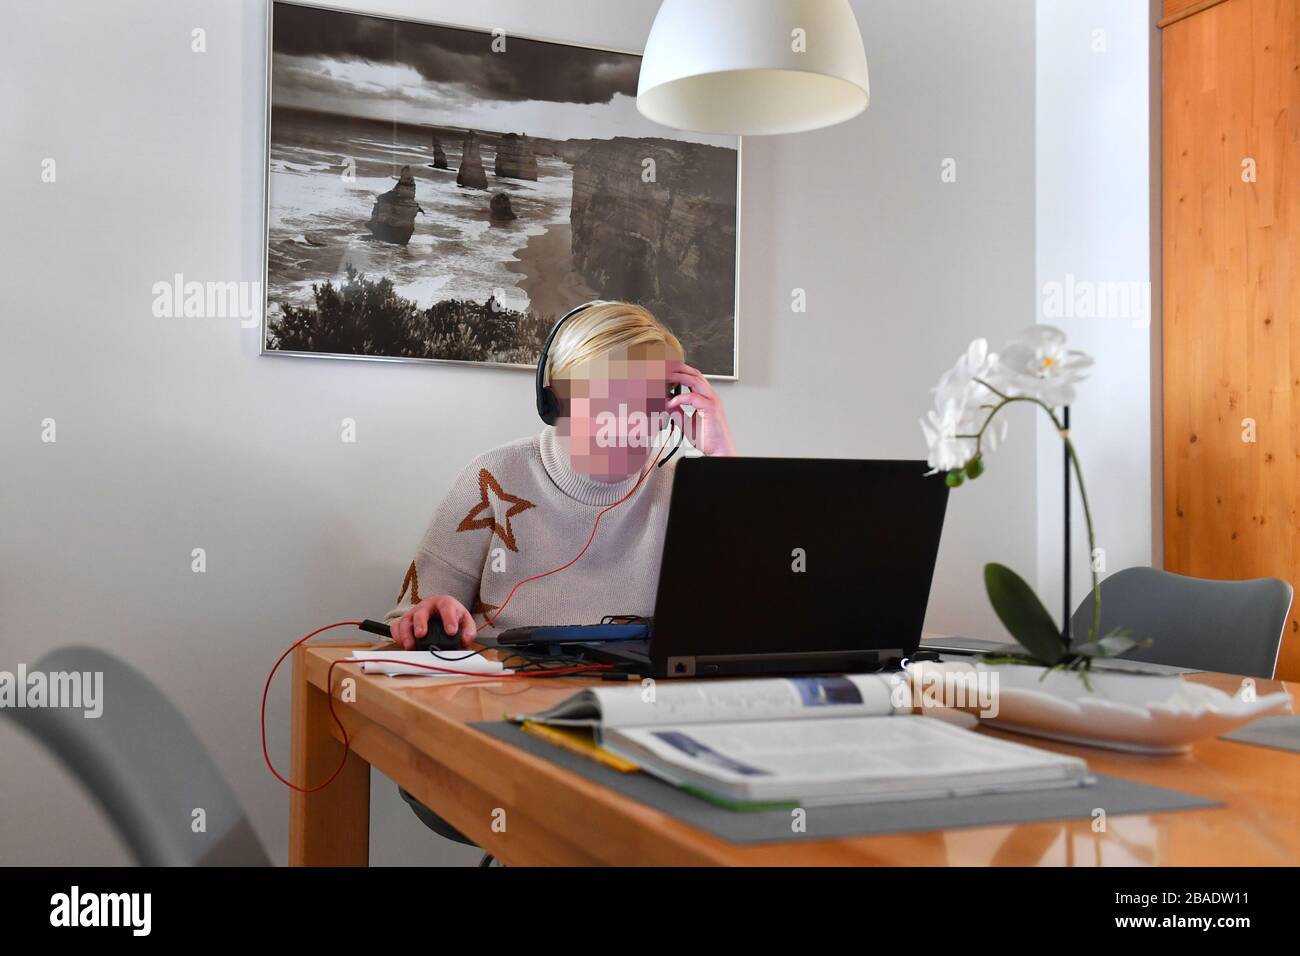 Munich, Deutschland. 26th Mar, 2020. A woman is sitting in her apartment in front of a laptop with headset and is working in the home office because of corona, pandemic, spread, corona crisis, corona virus, virus and pathogen. ? Sven Simon Fotoagentur GmbH & Co. Press Photo KG # Prinzess-Luise-Str. 41 # 45479 M uelheim/R uhr # Tel. 0208/9413250 # Fax. 0208/9413260 # GLS Bank # BLZ 430 609 67 # Kto. 4030 025 100 # IBAN DE75 4306 0967 4030 0251 00 # BIC GENODEM1GLS # www.svensimon.net. | usage worldwide Credit: dpa/Alamy Live News Stock Photo